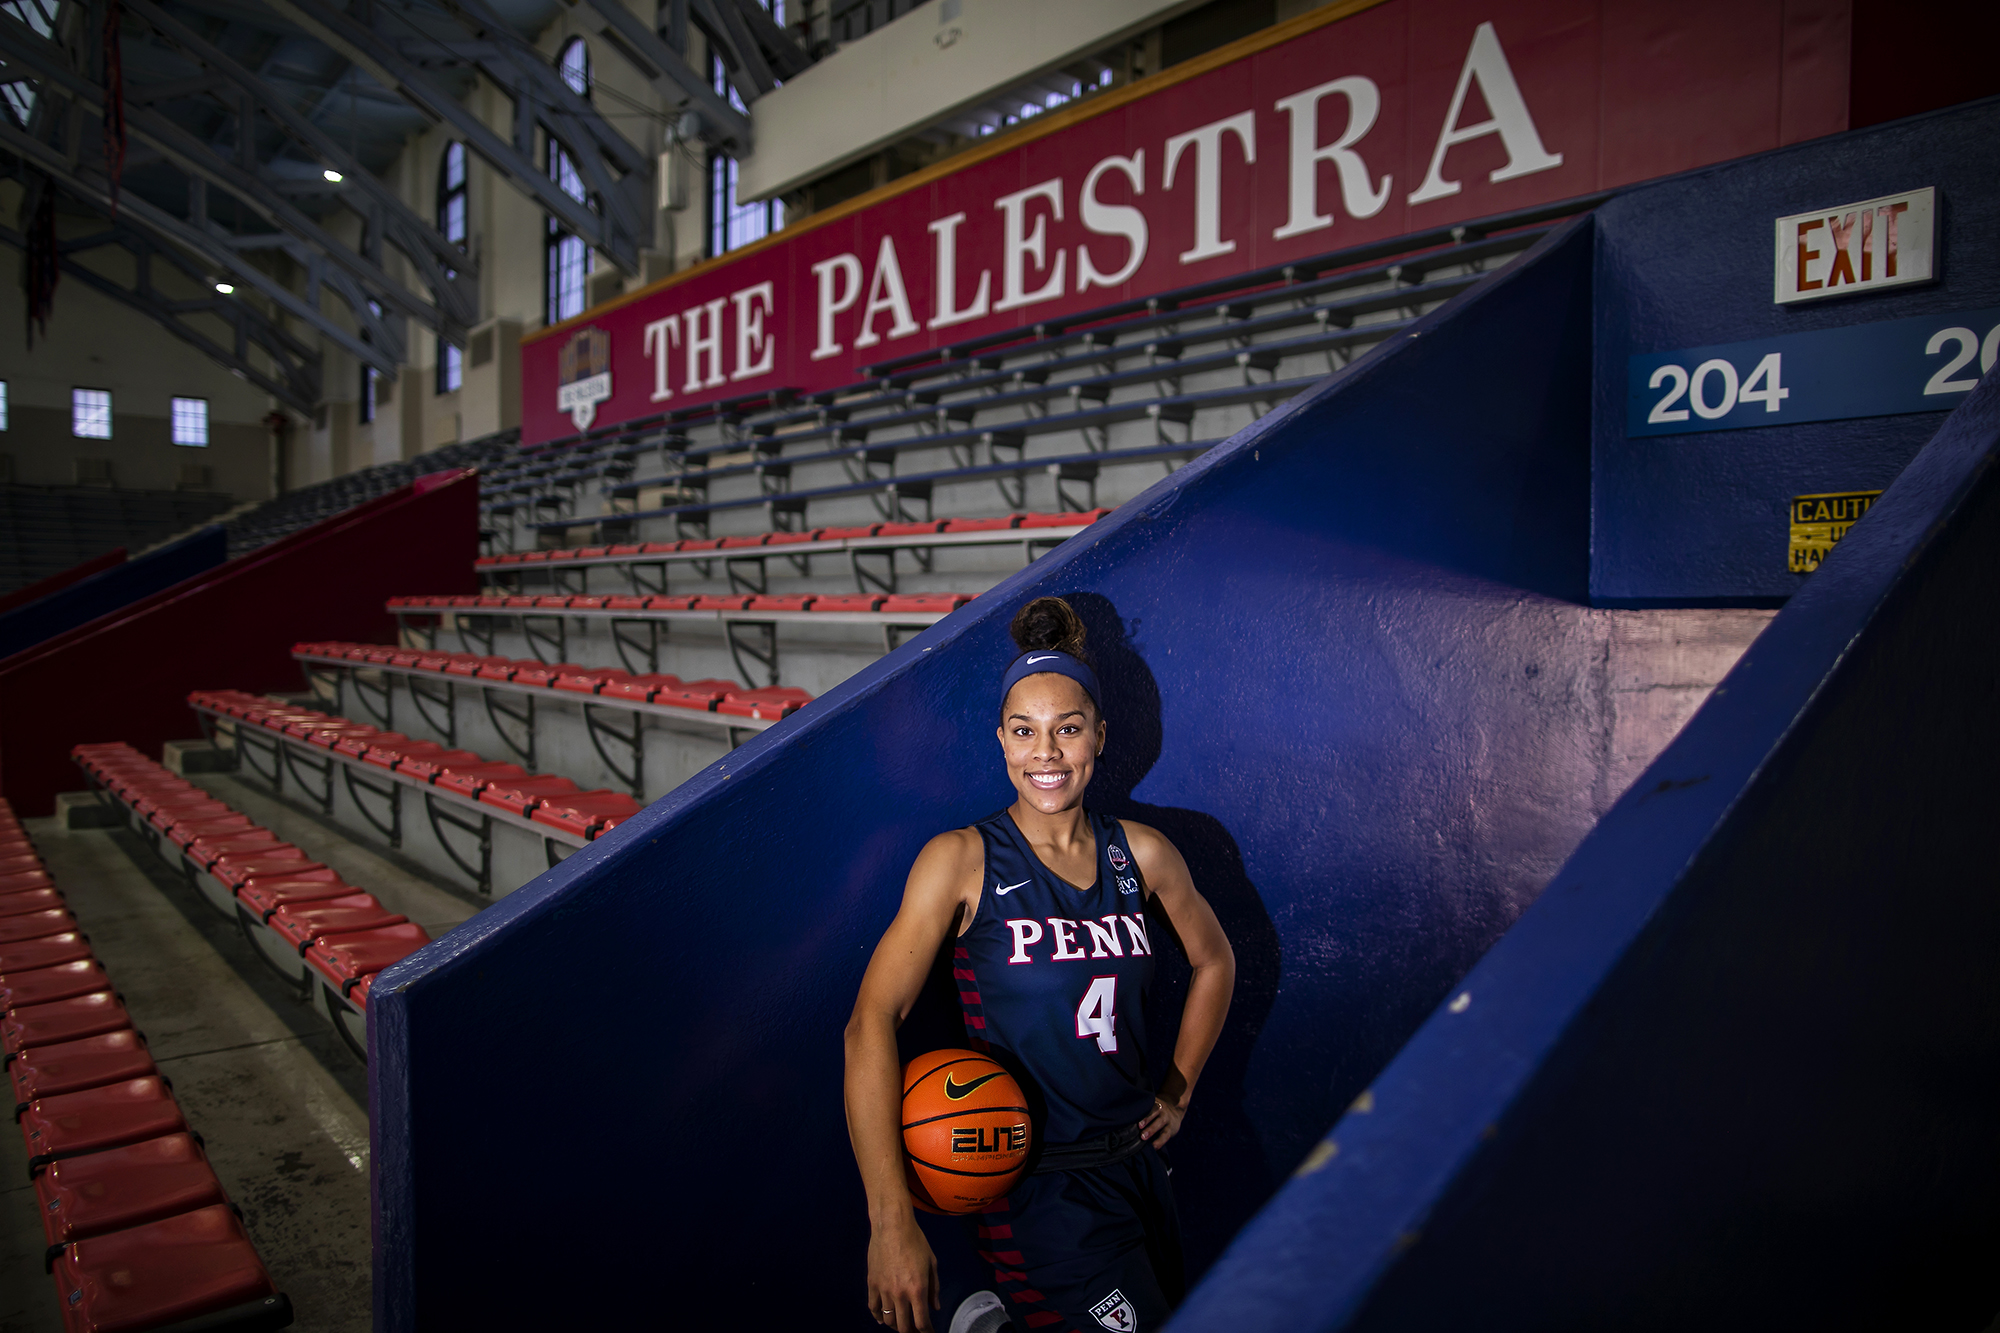 Suttle holds a basketball while standing in a passageway at the Palestra.